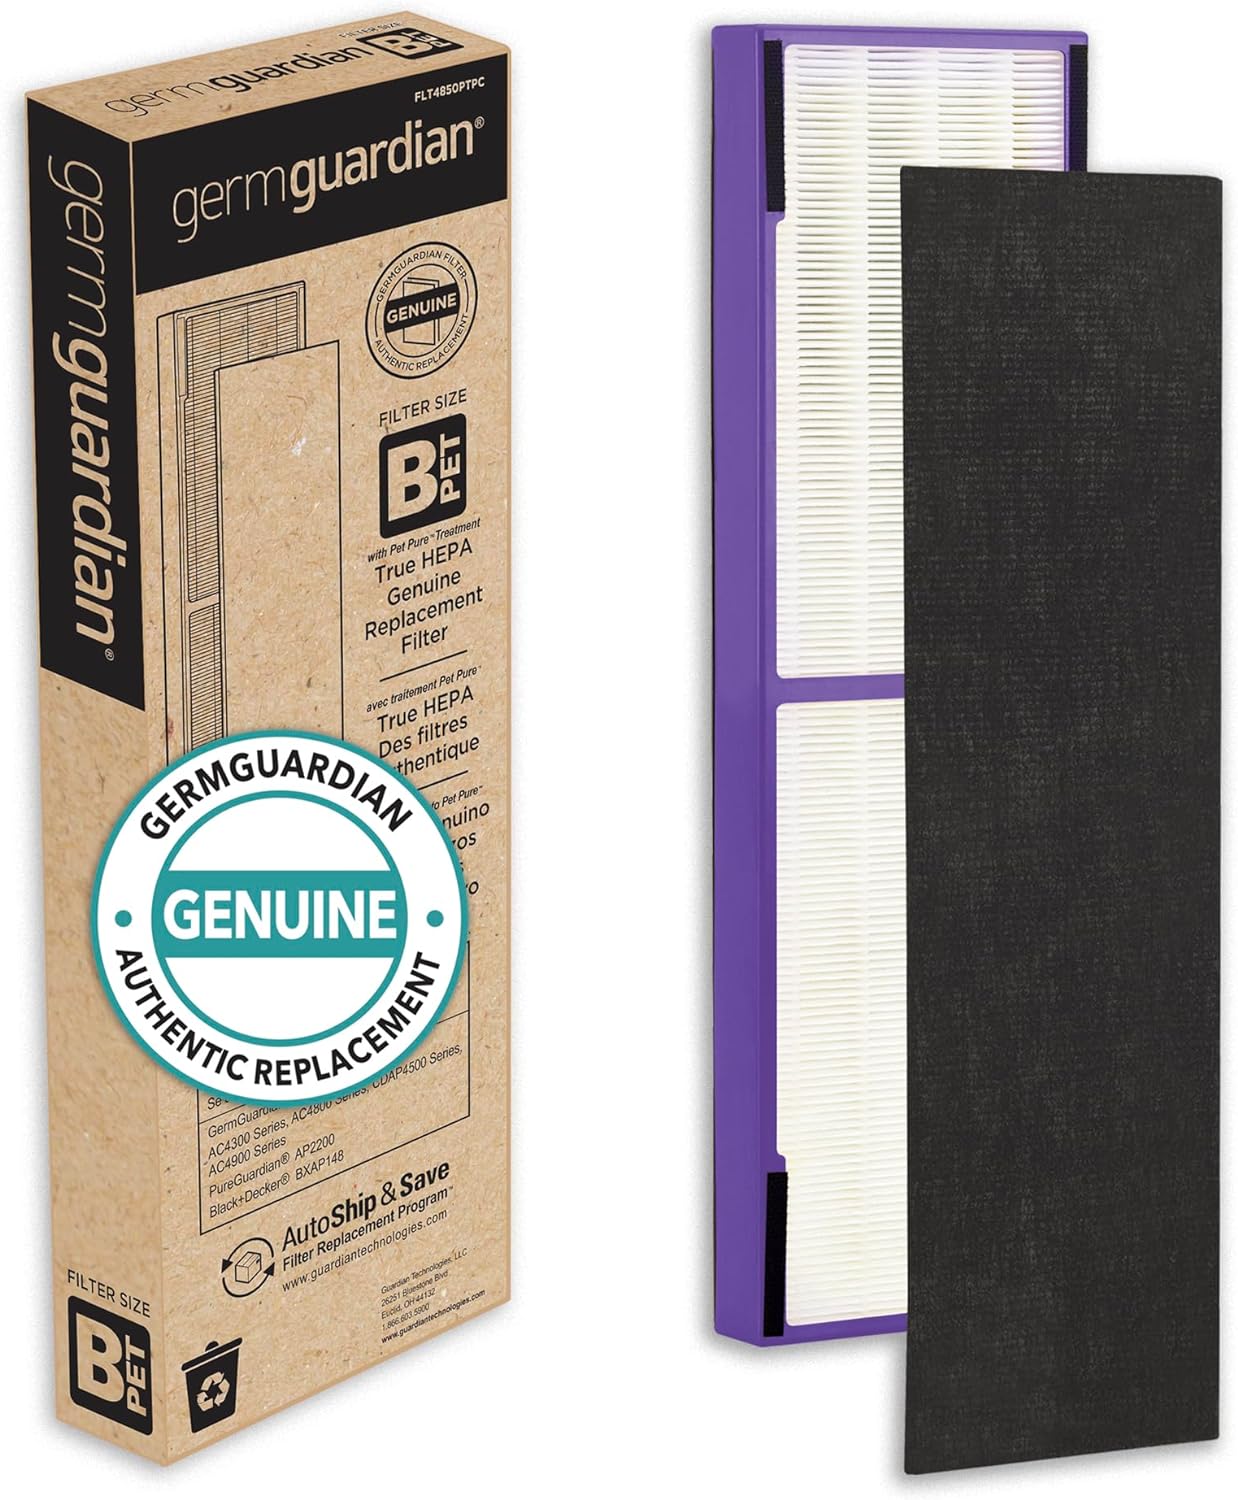 Germ Guardian FLT4850PT True HEPA Genuine Air Purifier Replacement Filter B, with Pet Pure Treatment for GermGuardian C4900, AC4825, AC4850PT, CDAP4500, AC4300, and More